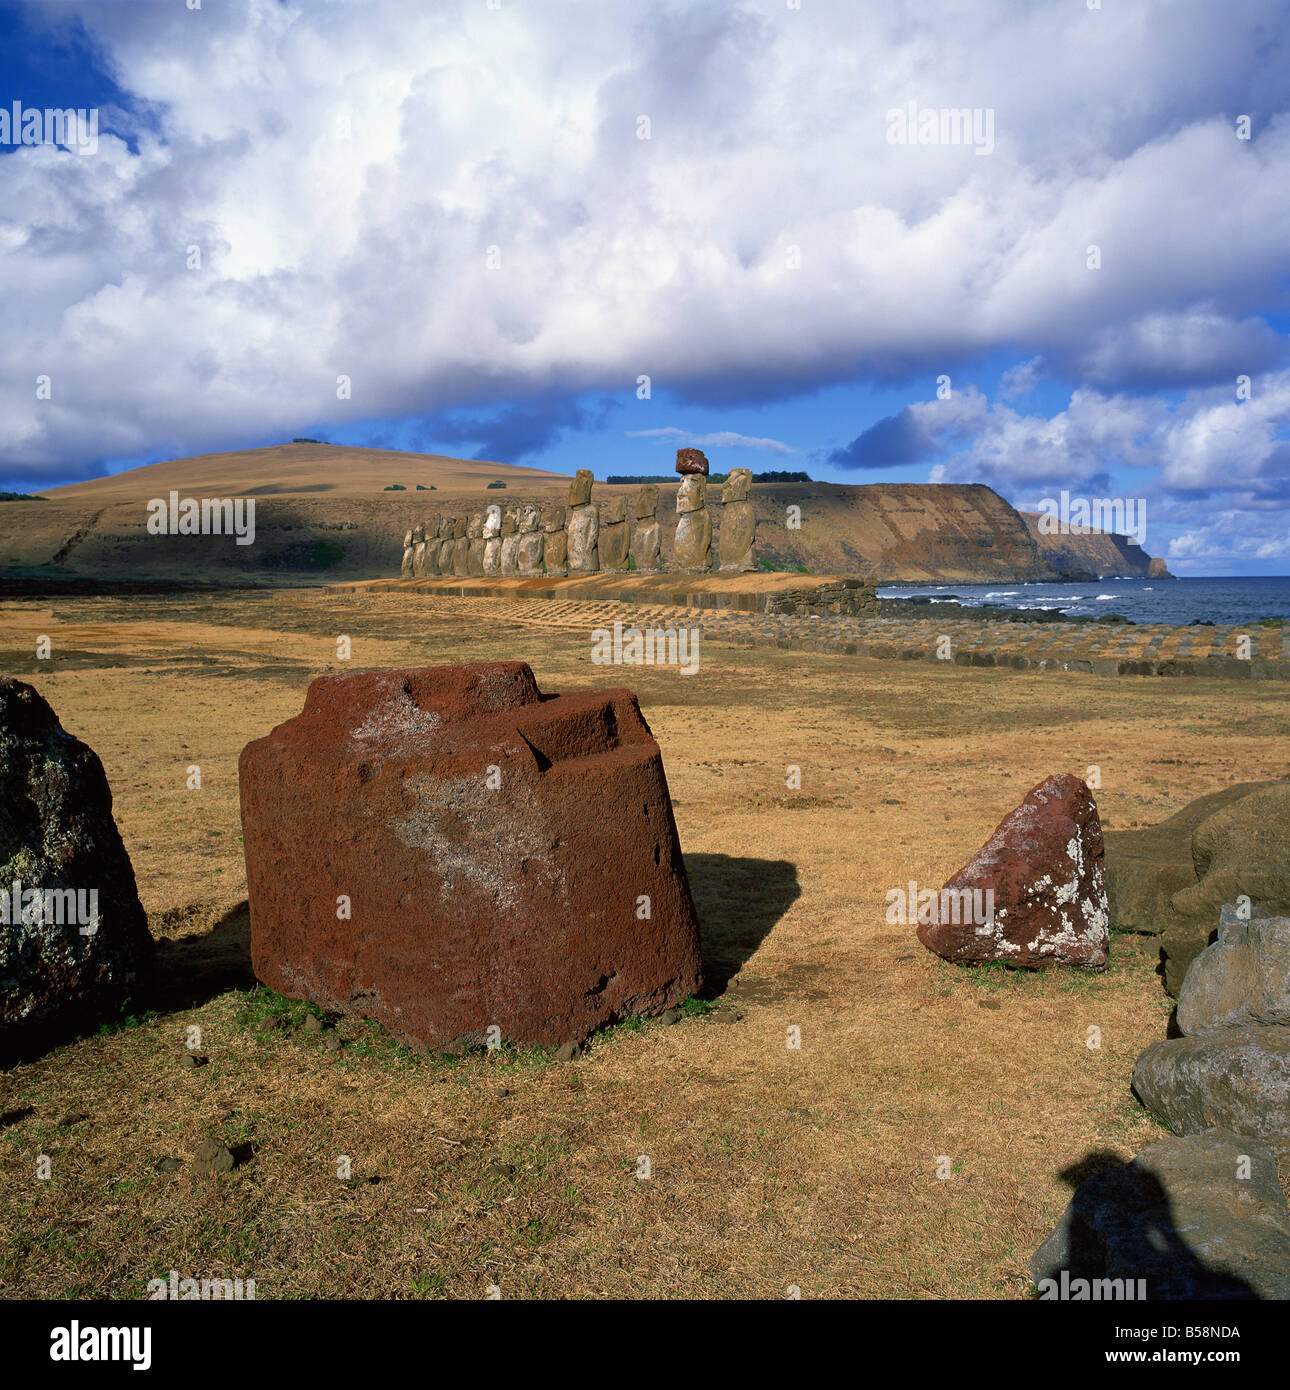 Fallen topknot in foreground Ahu Tongariki Rapa Nui National Park Easter Island Chile South America Stock Photo